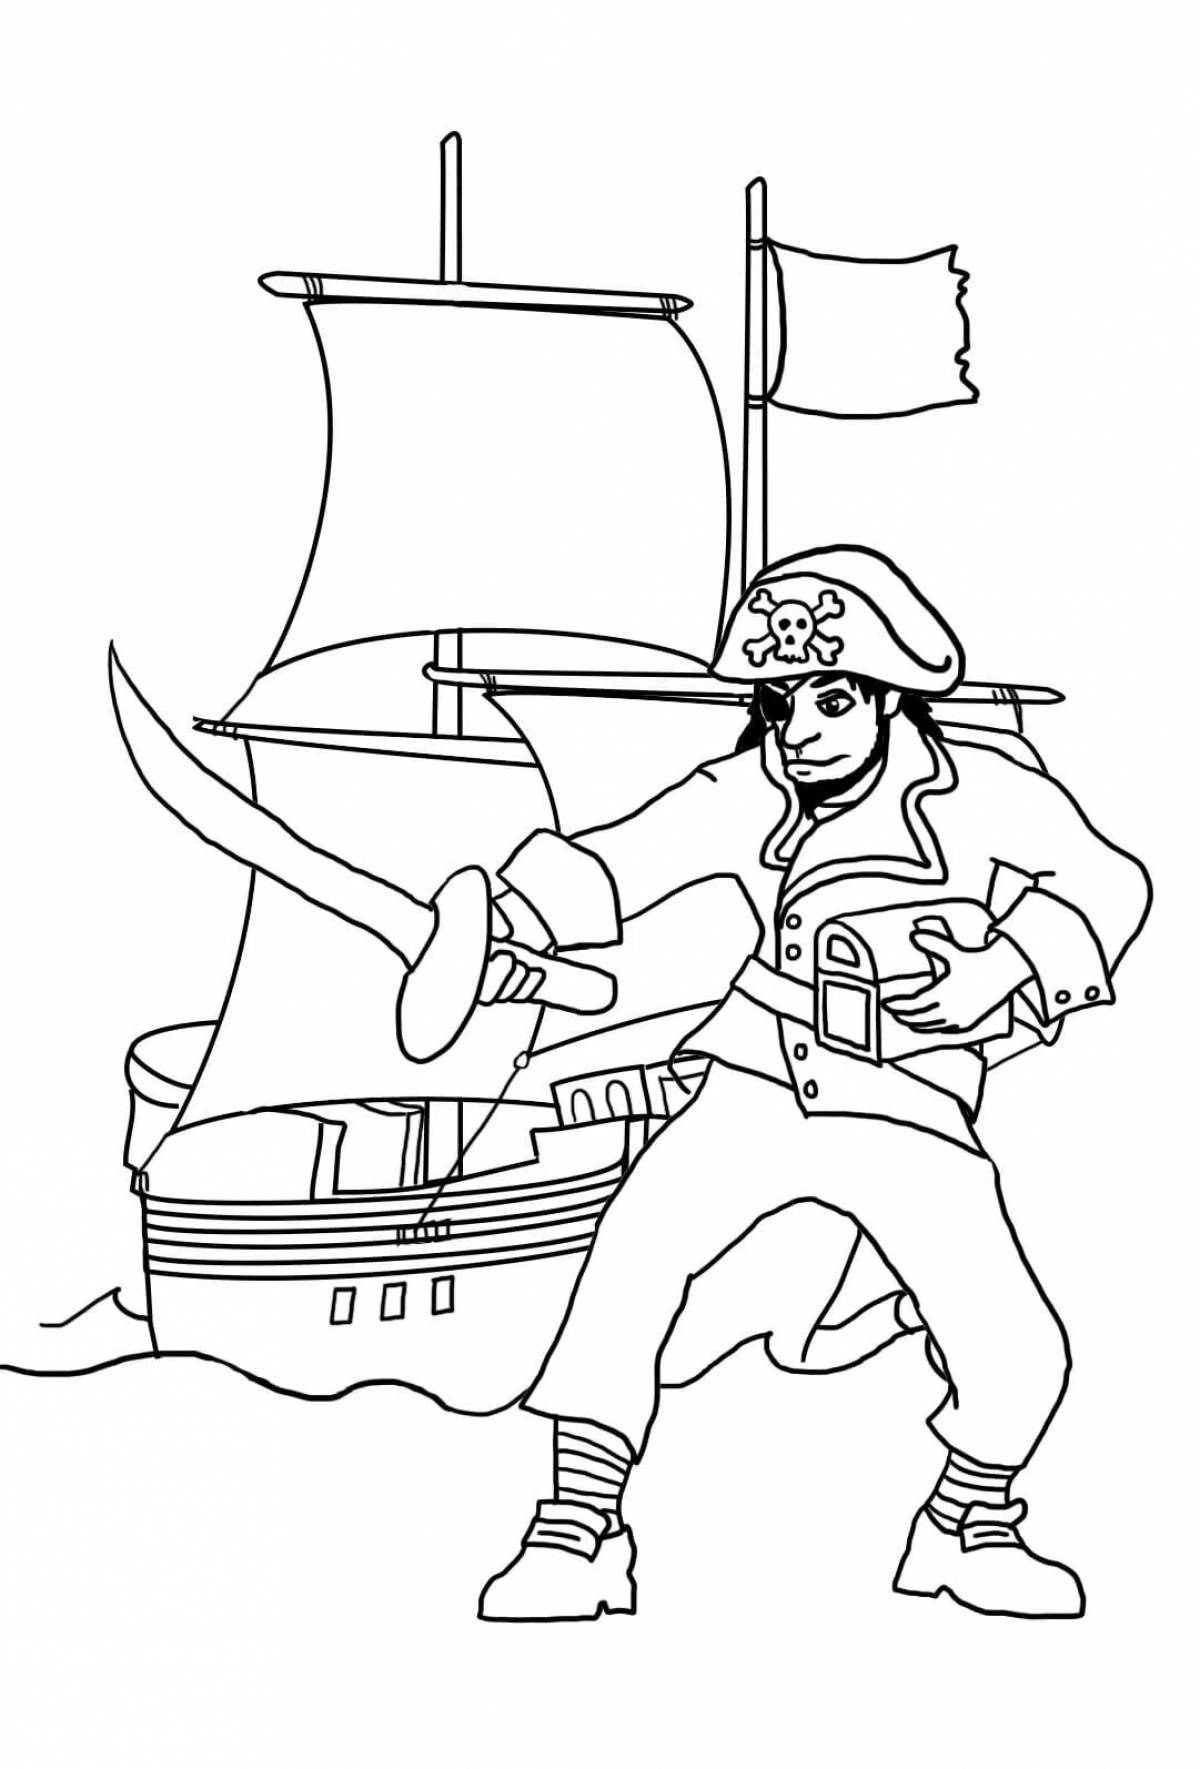 Coloring page dramatic ship captain